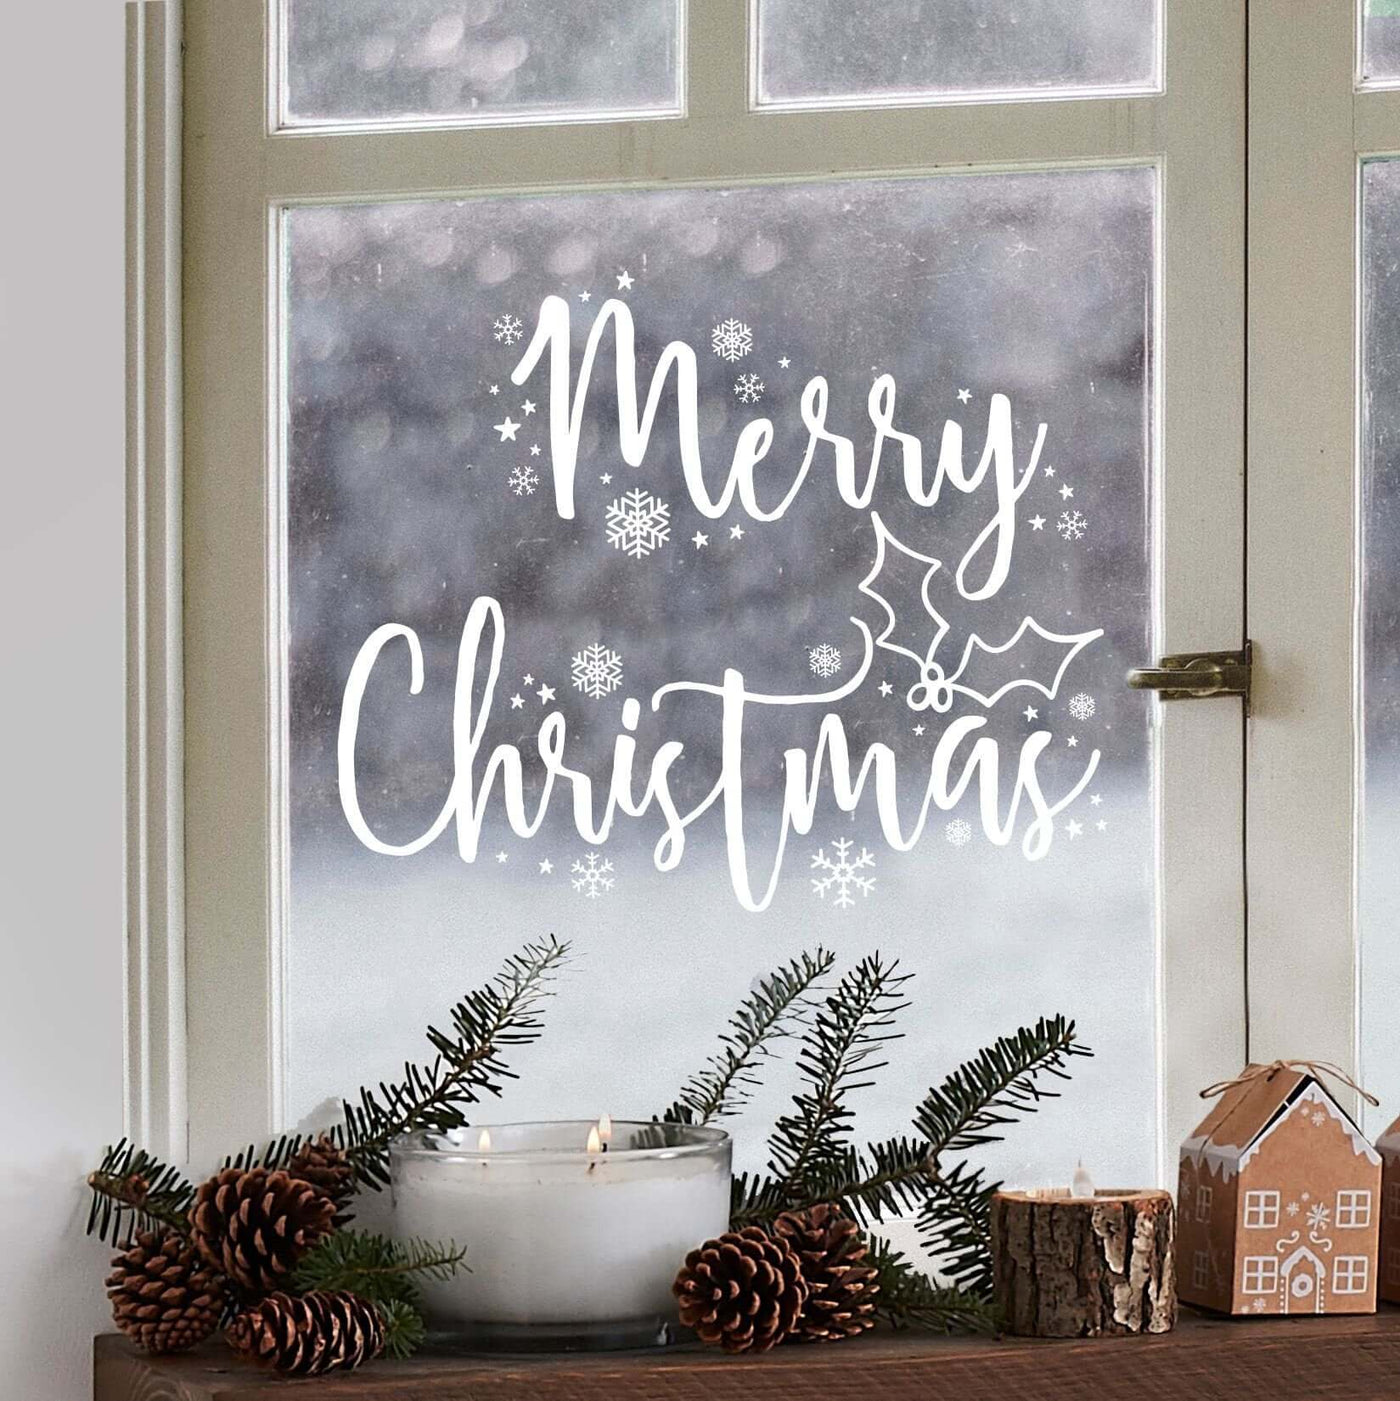 "Merry Christmas" Festive Window Sticker - LIVE LAUGH LOVE LIMITED